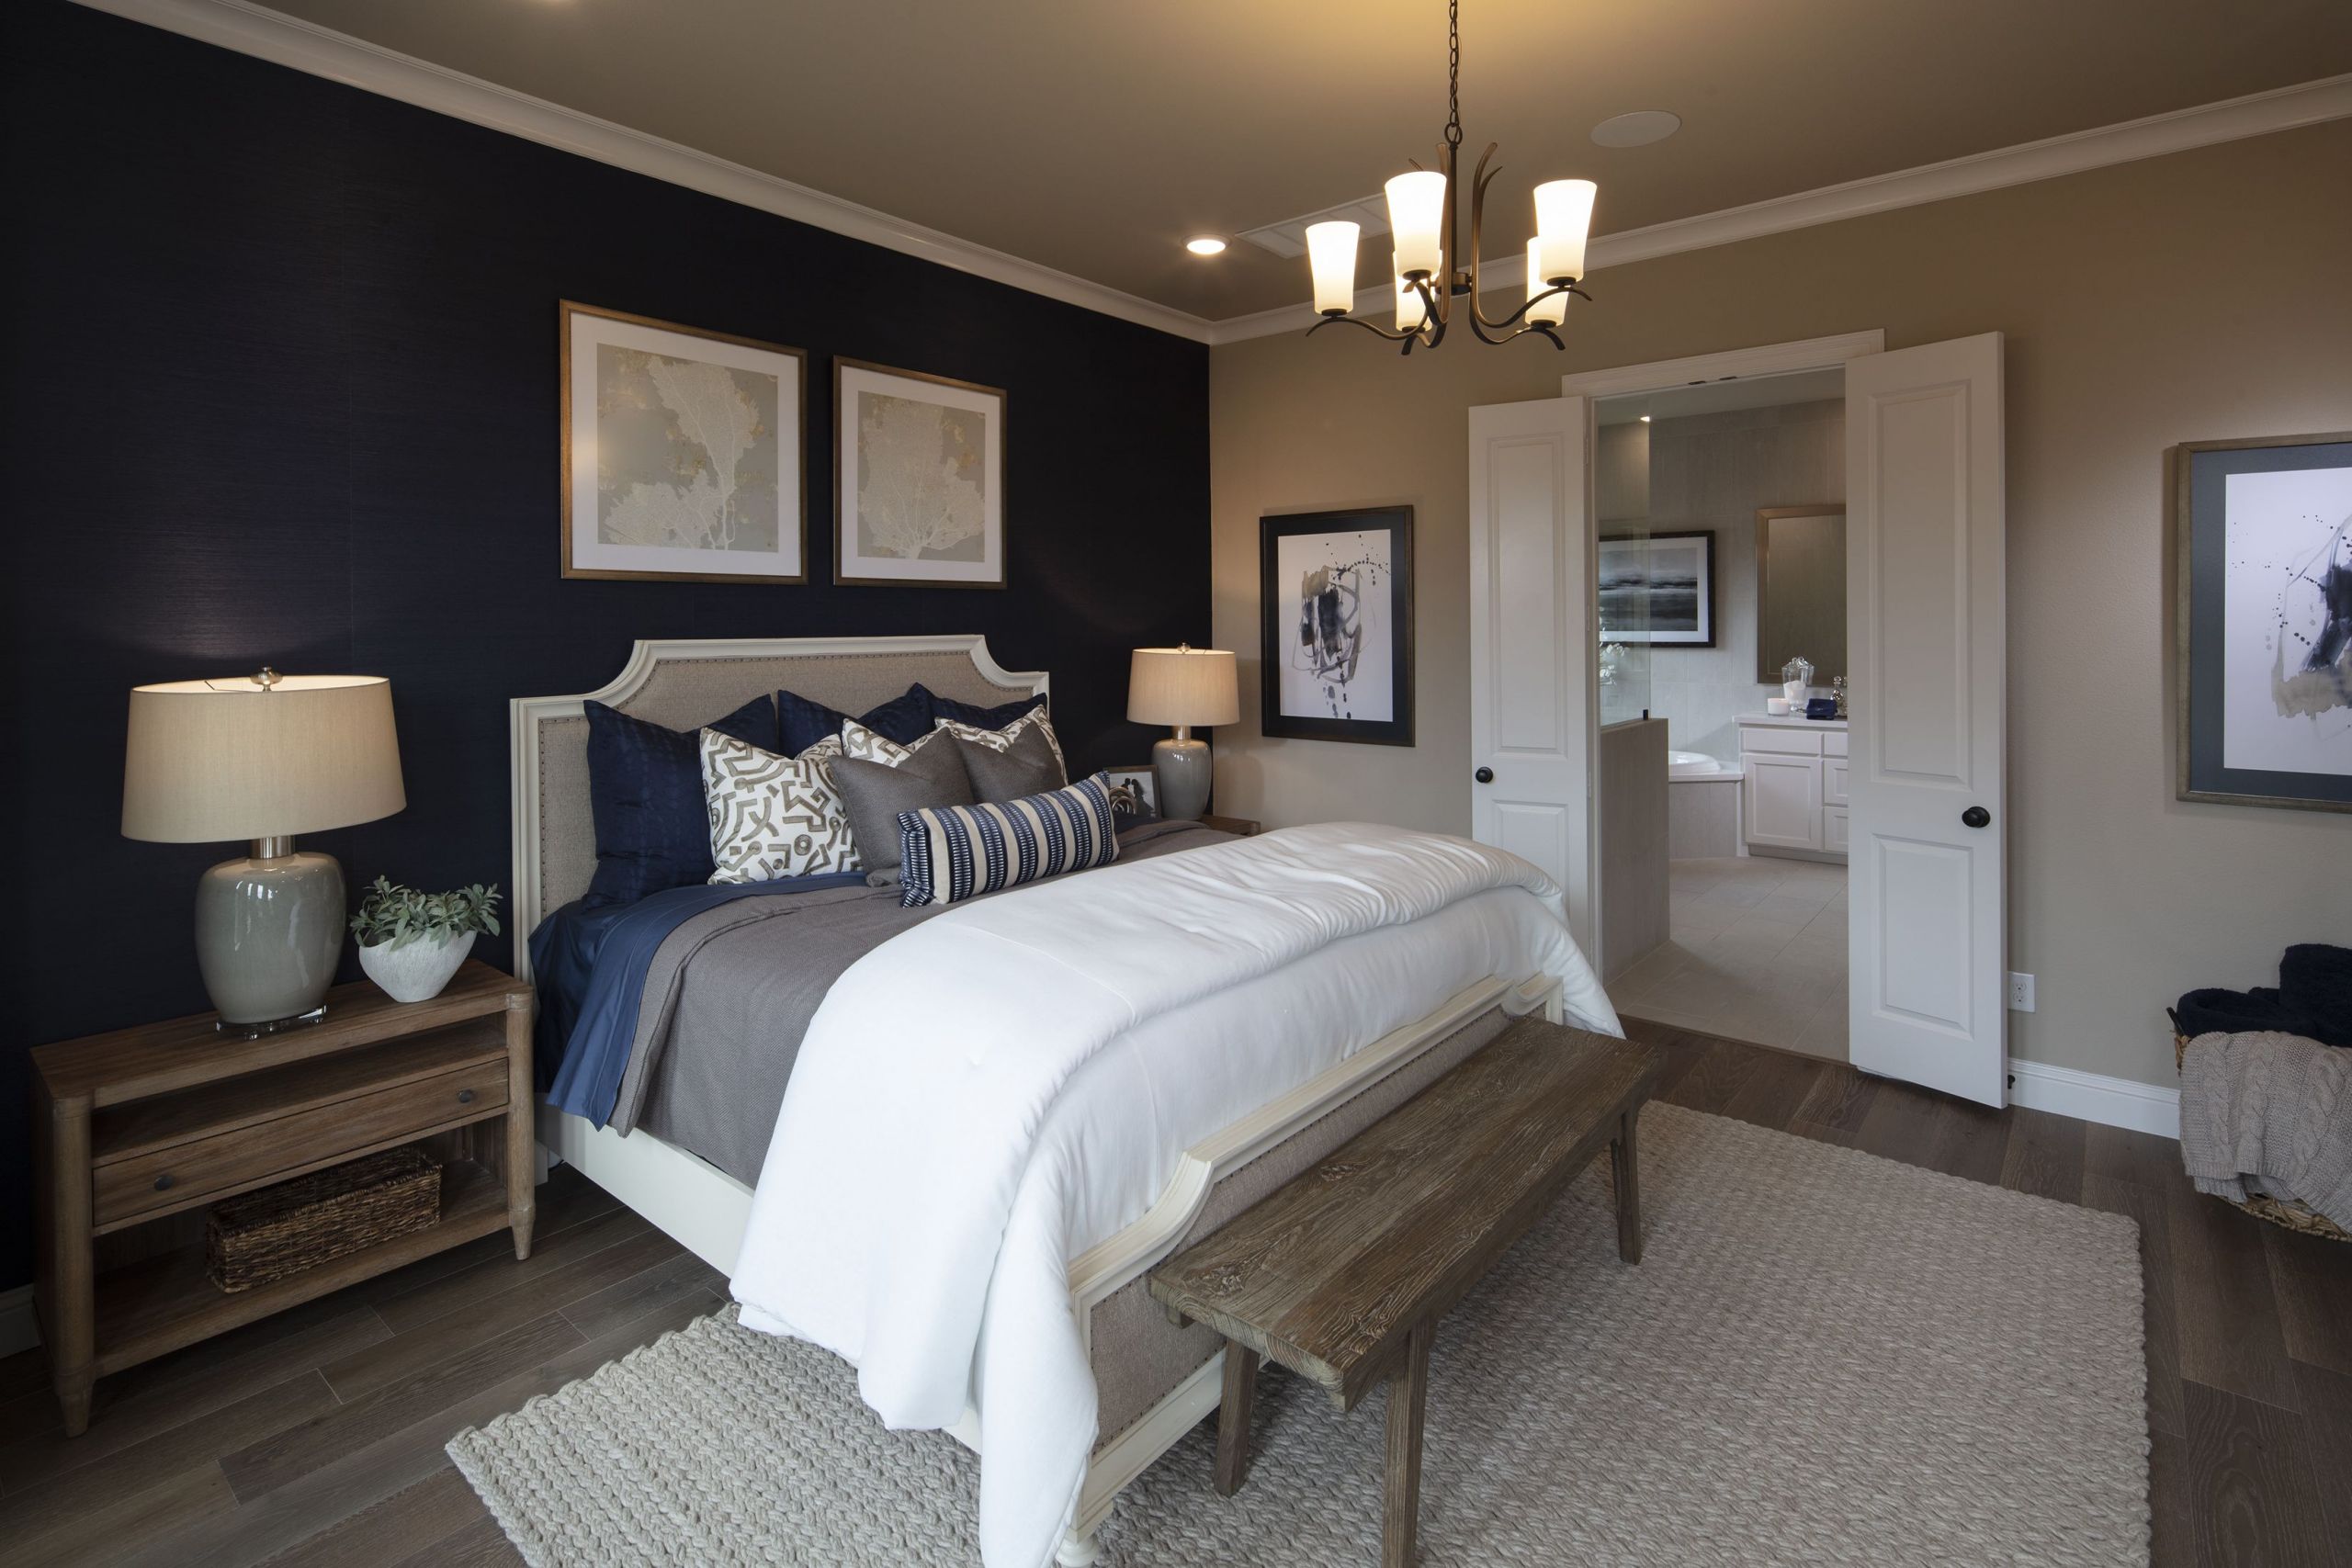 Blue Accent Wall Bedroom
 A Navy blue accent wall in the bedroom creates a look of